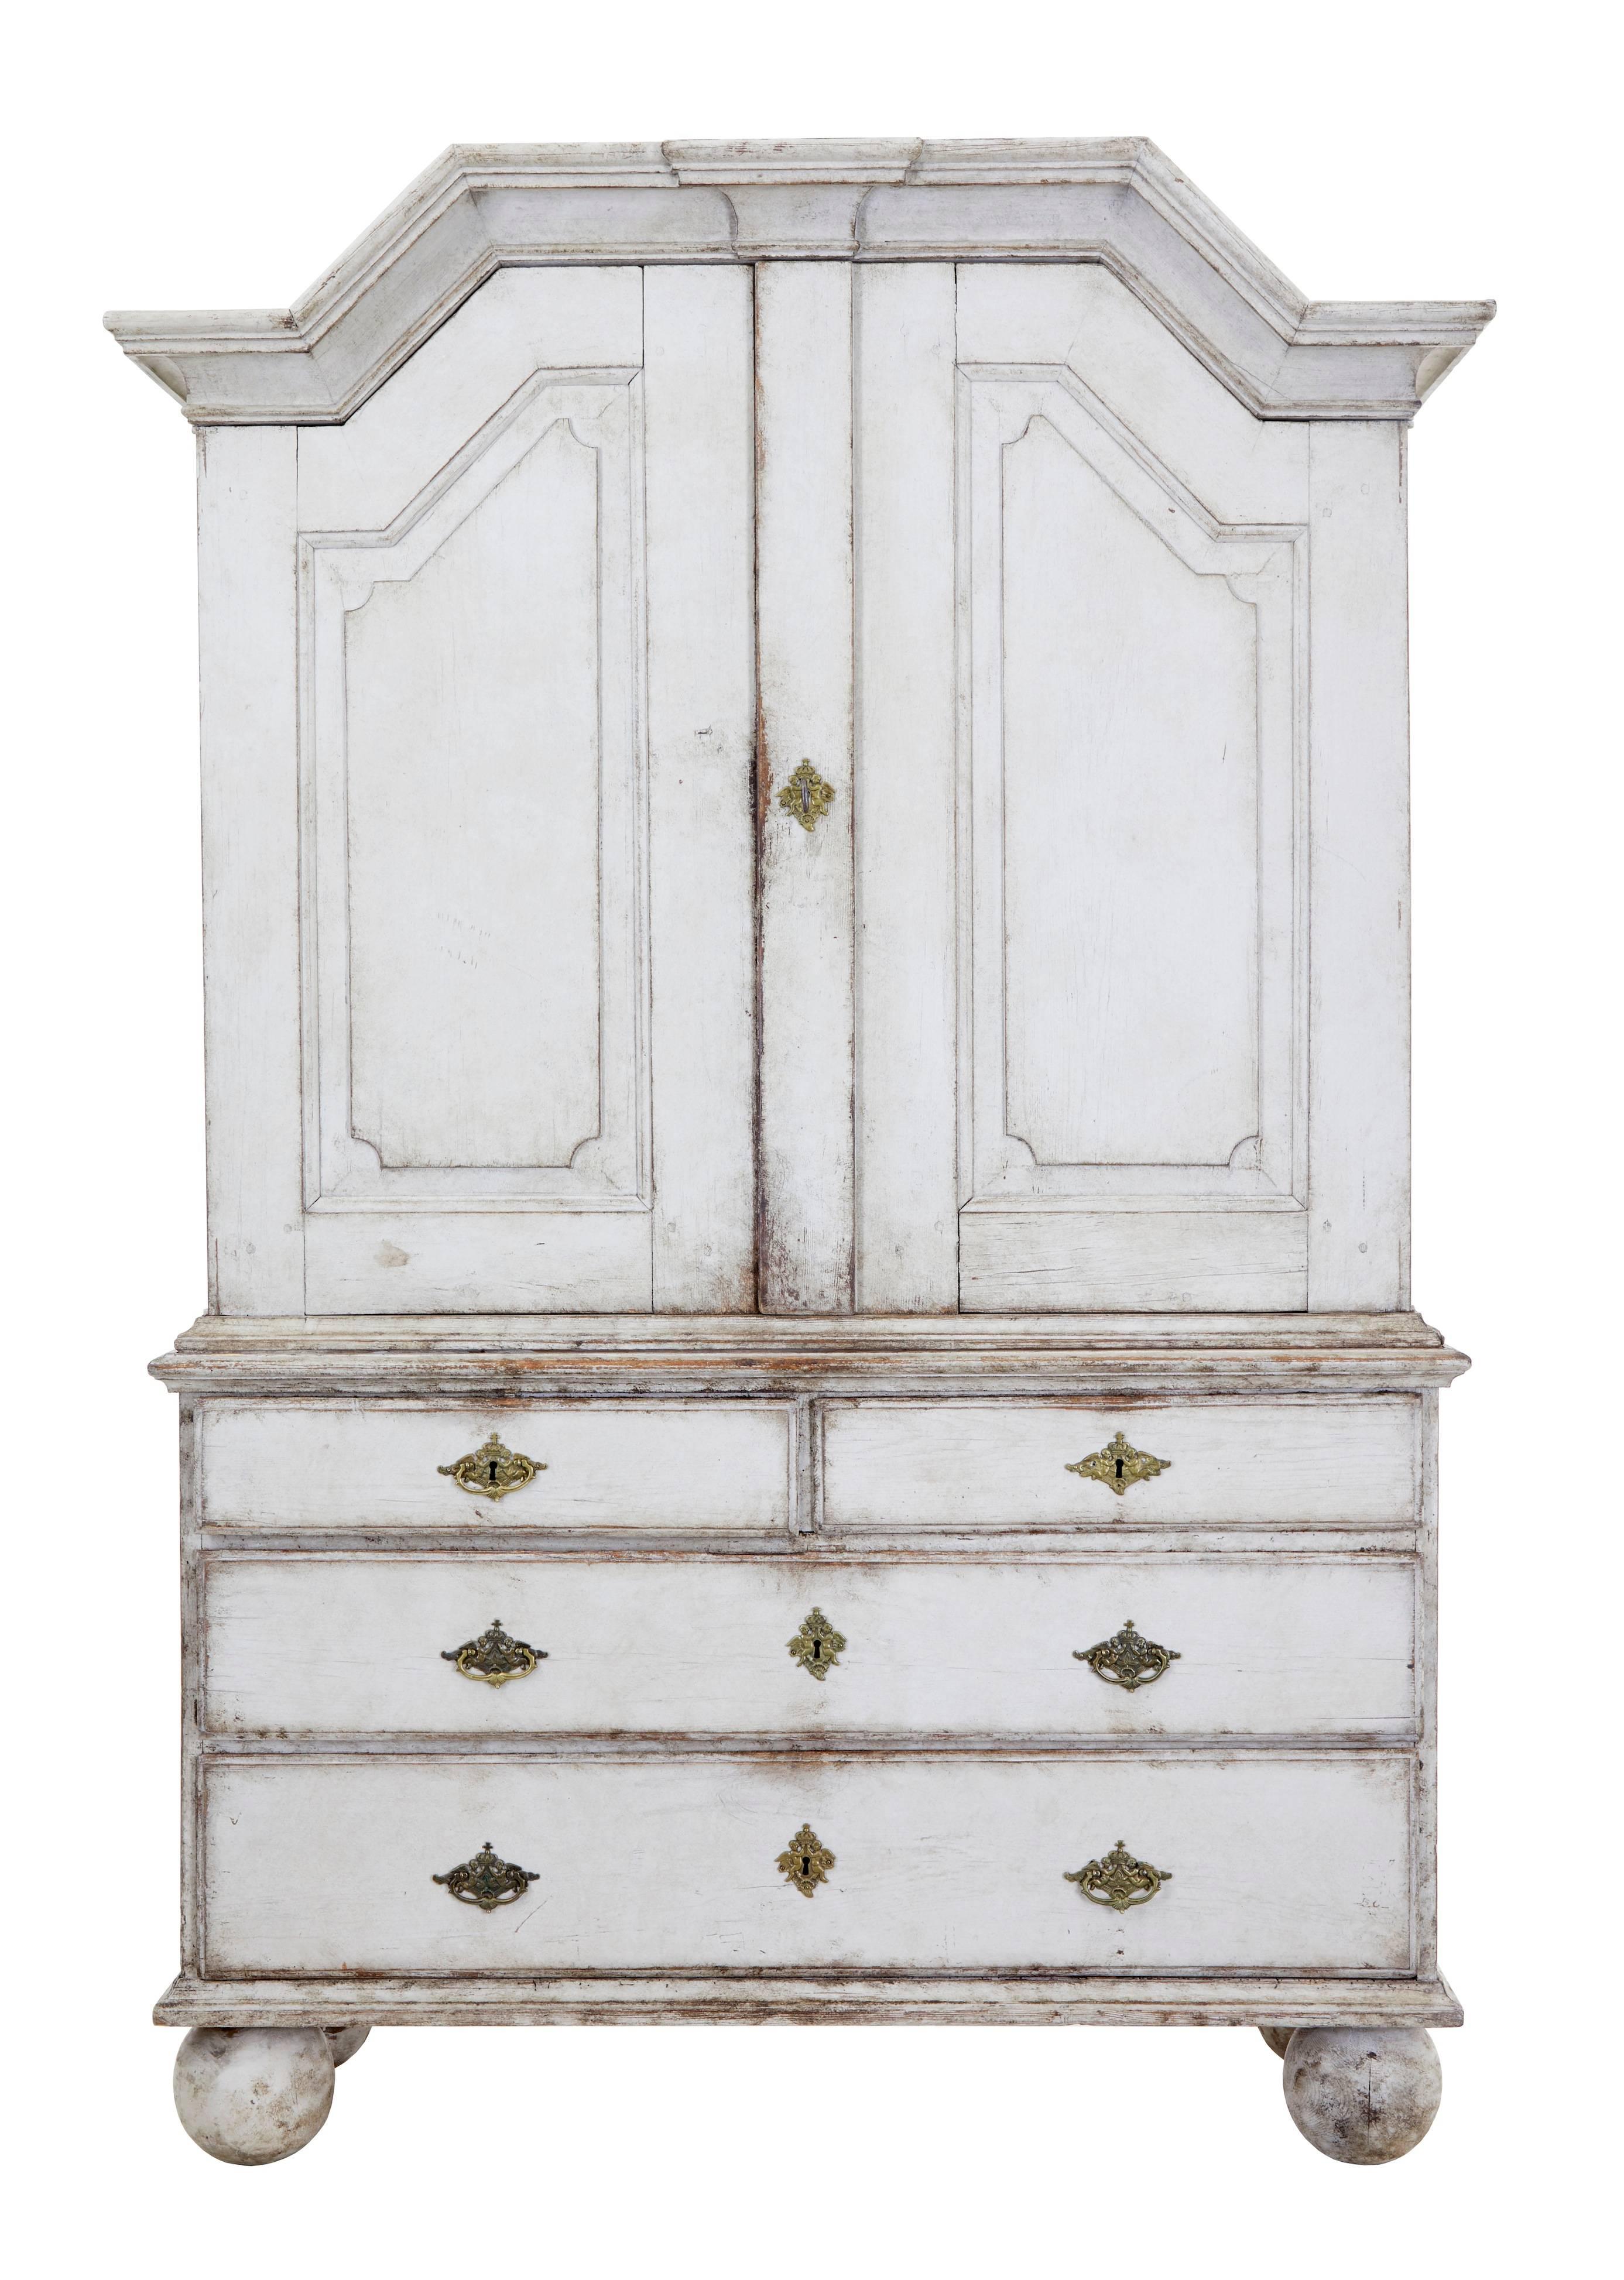 Fine architectural Swedish pine cabinet on chest, circa 1850.
Consisting of two parts.
Top section with architectural cornice. Double doors open to reveal four shelves.
Bottom chest section with two short over two long drawers. Standing on